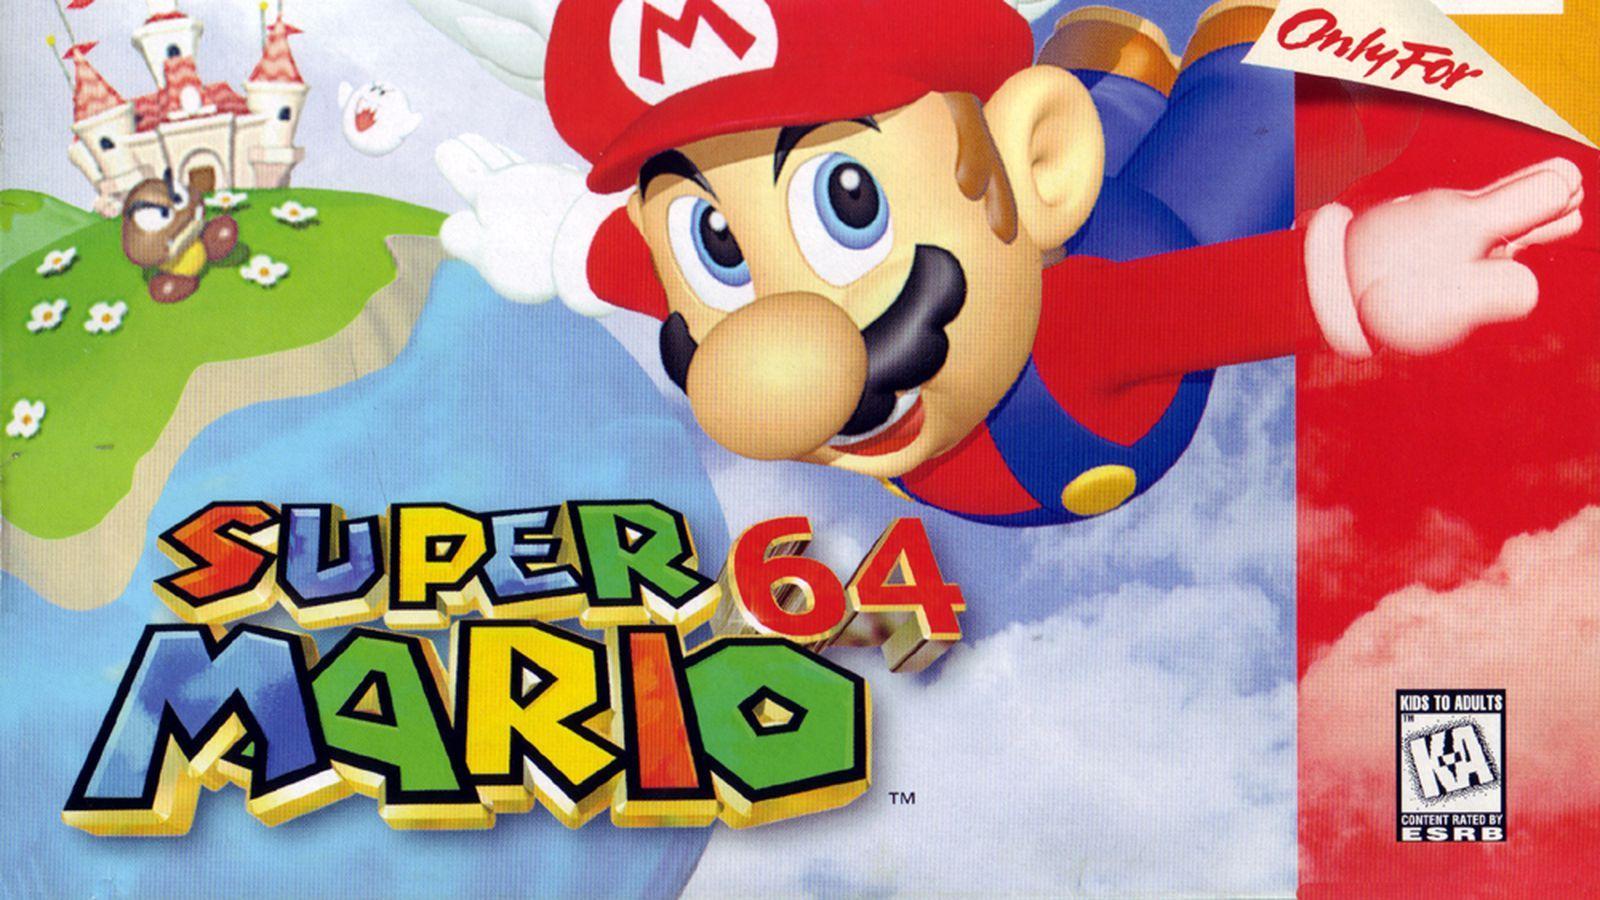 super mario 64 download pc for project 64